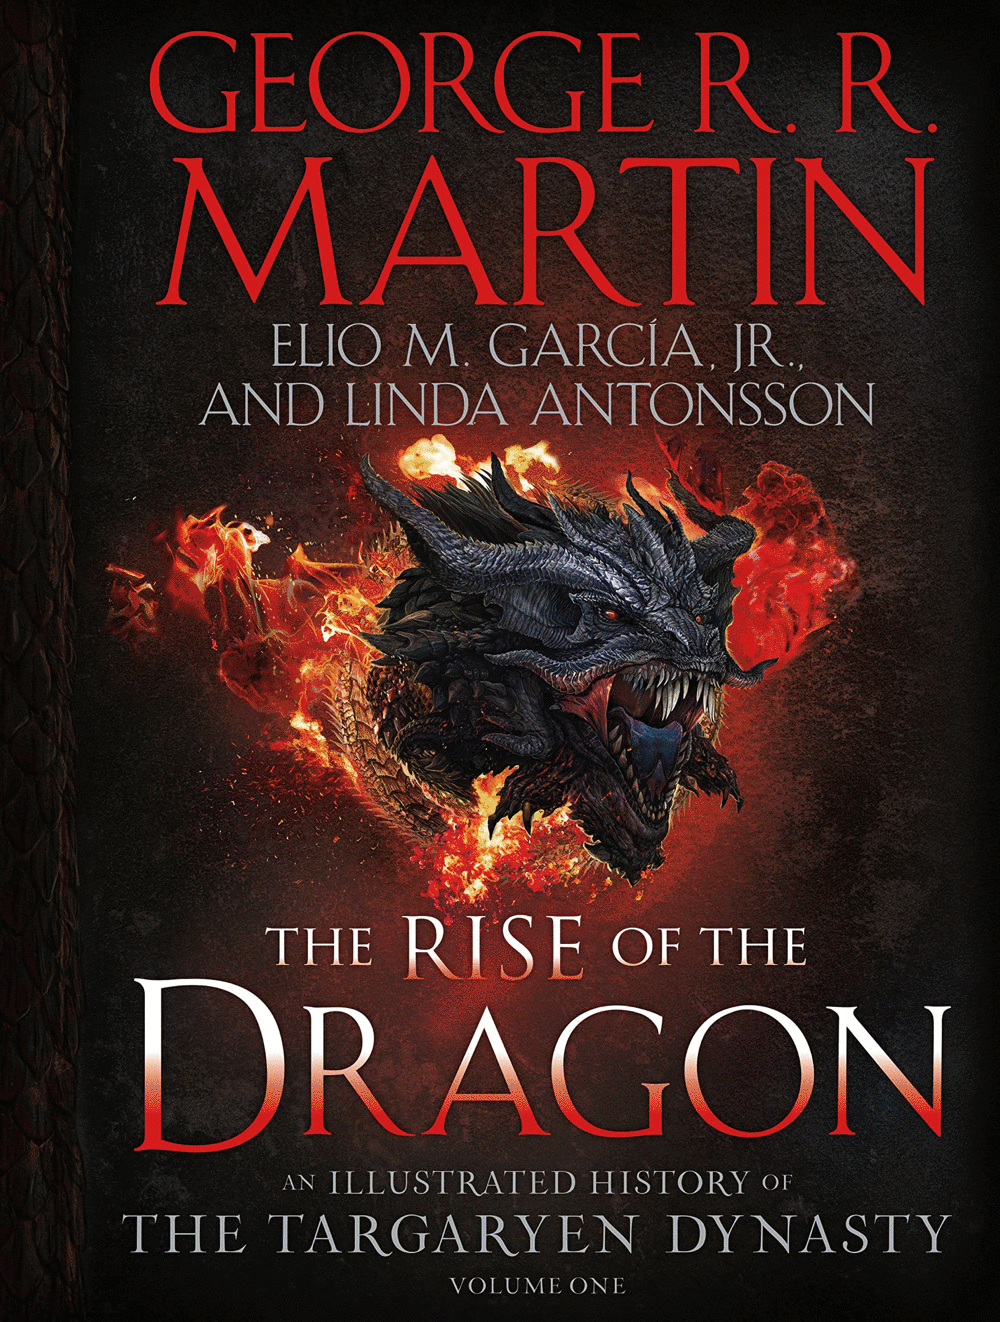 Images from 'The Rise of the Dragon: An Illustrated History of the Targaryen Dynasty, Volume One' (Courtesy of Penguin Random House)